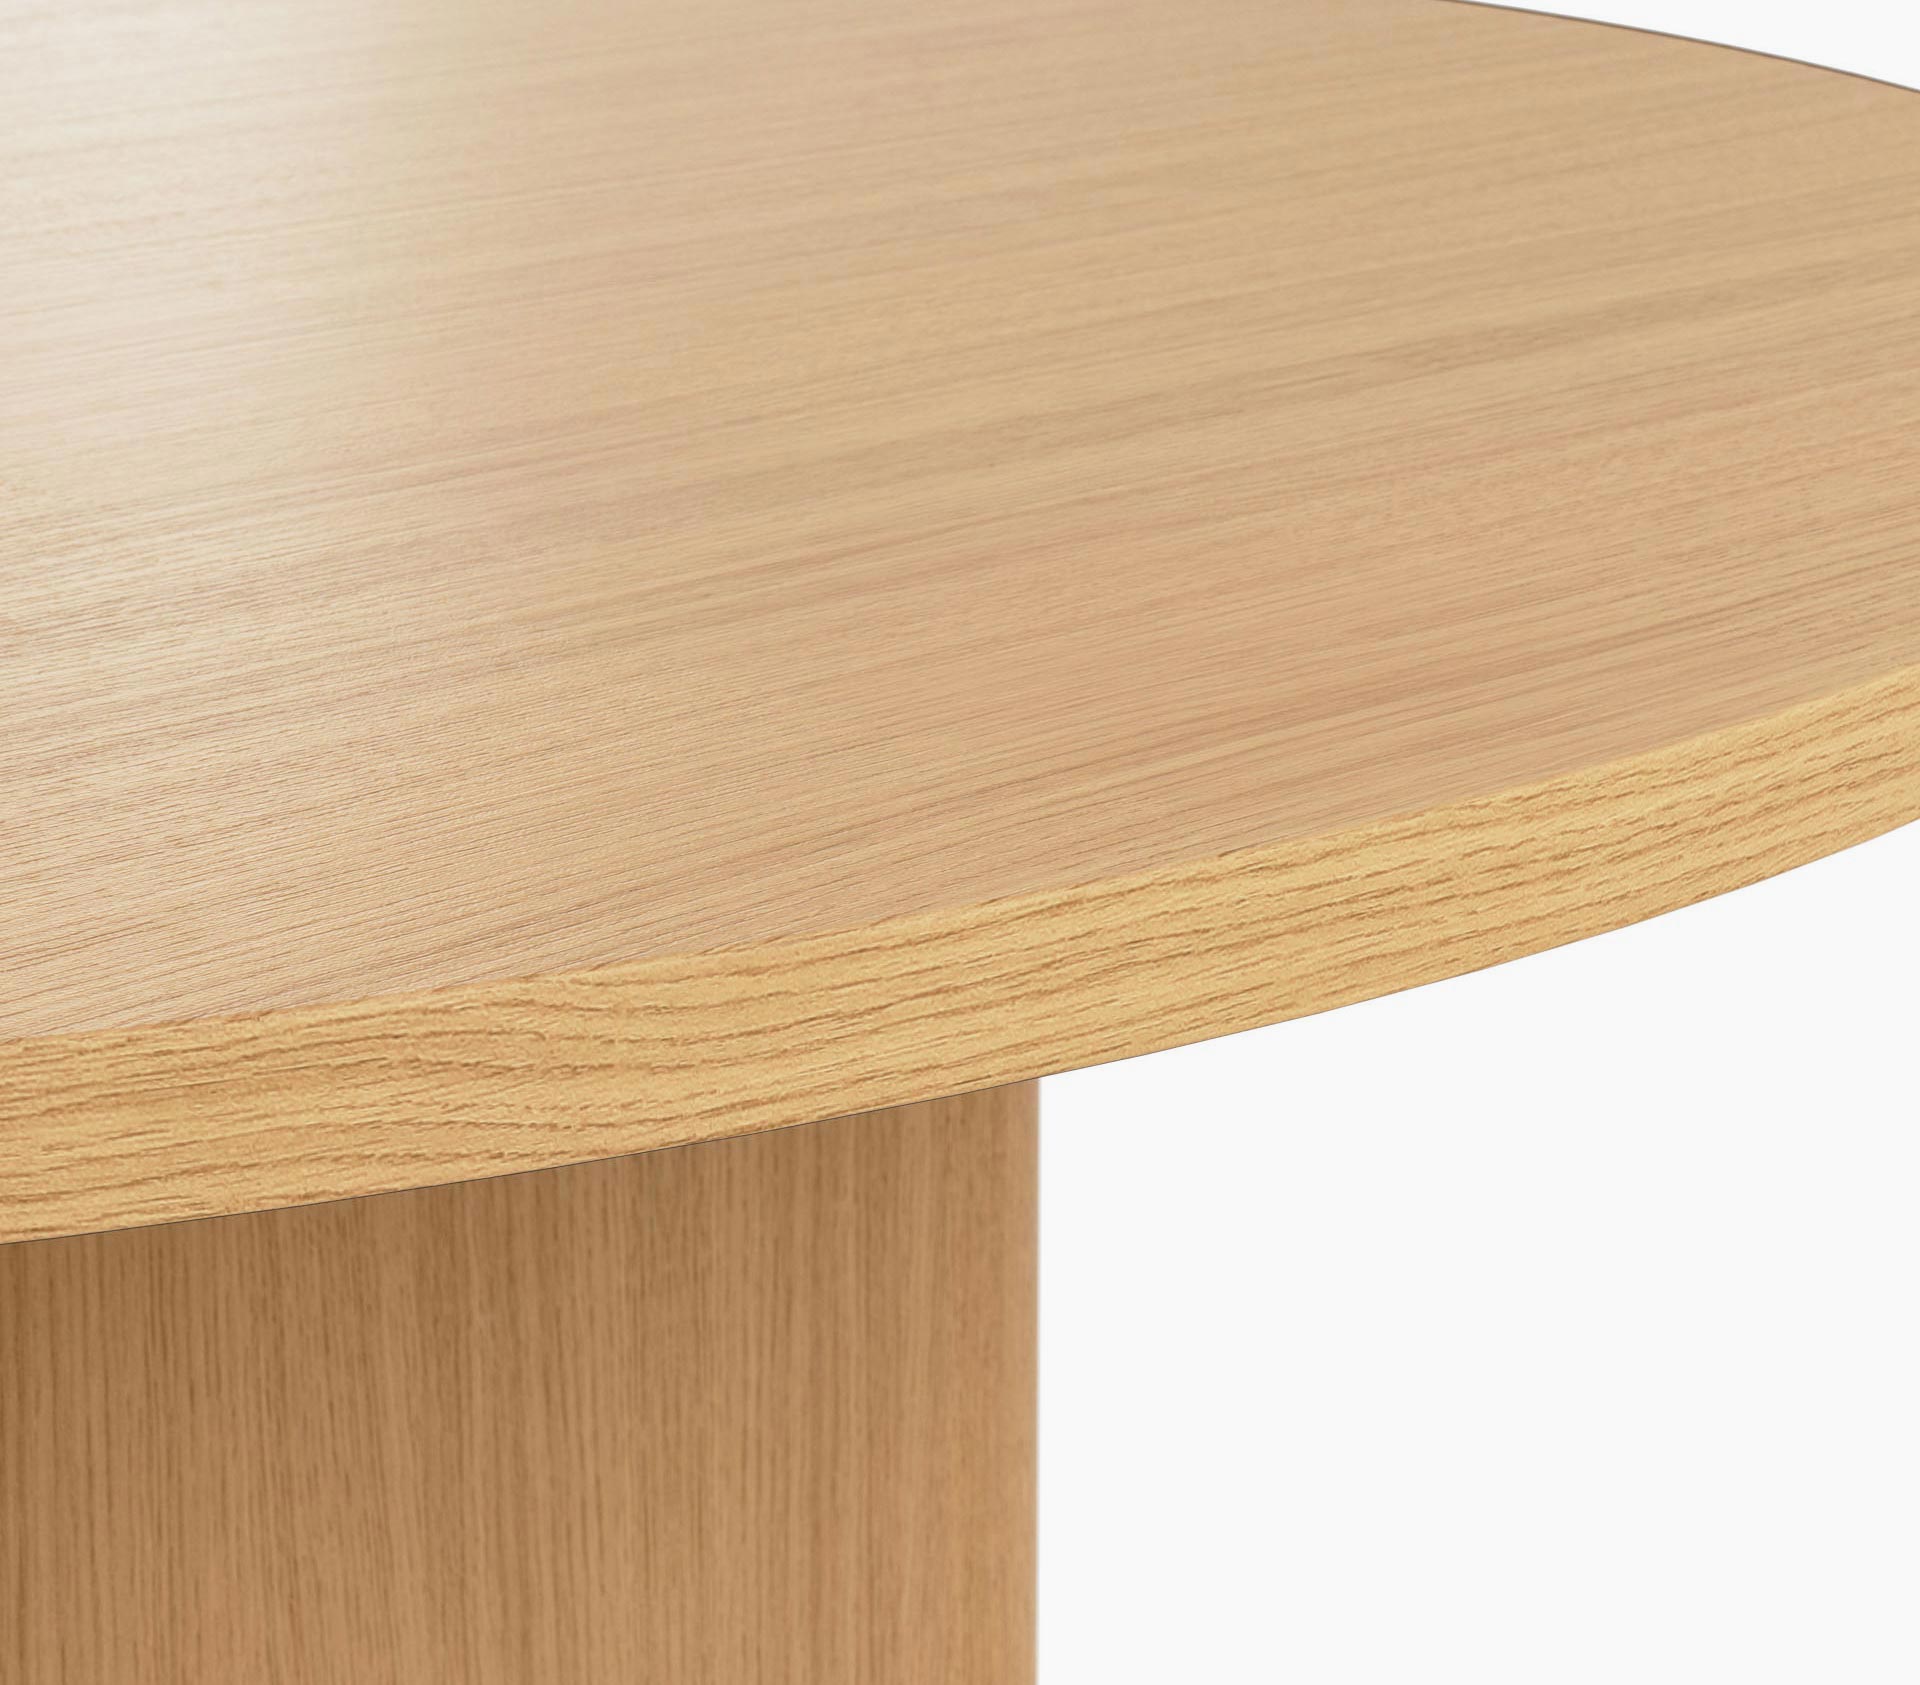 Edge detail on a racetrack-shaped JD Conference Table in natural rift cut oak with a 1.25” thick tabletop